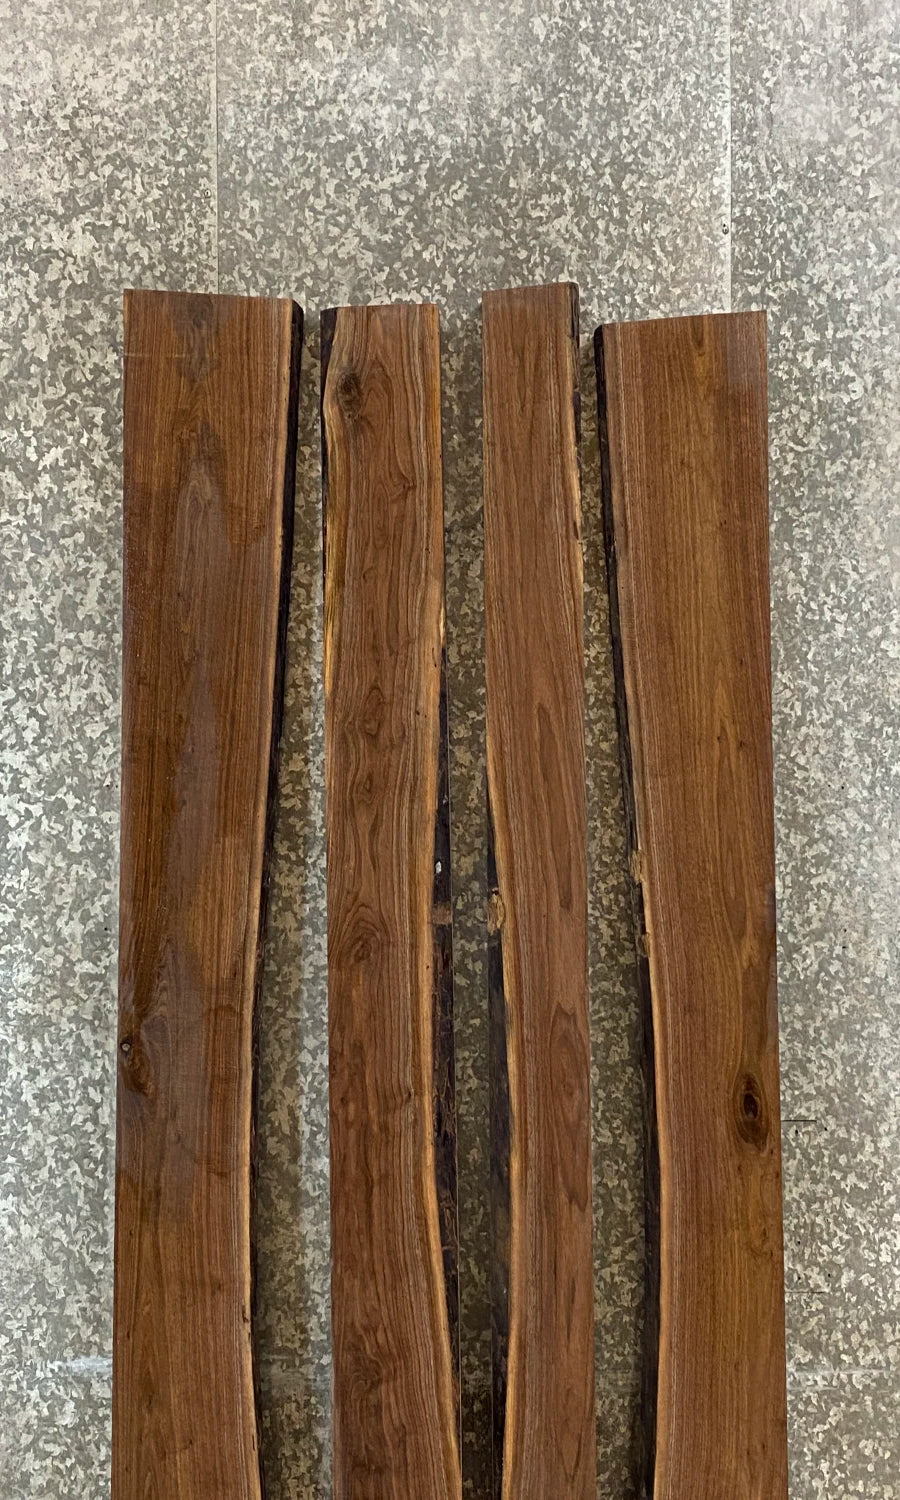 4- Live Edge Black Walnut Table Top/Dining Table Top Set 39236-39239